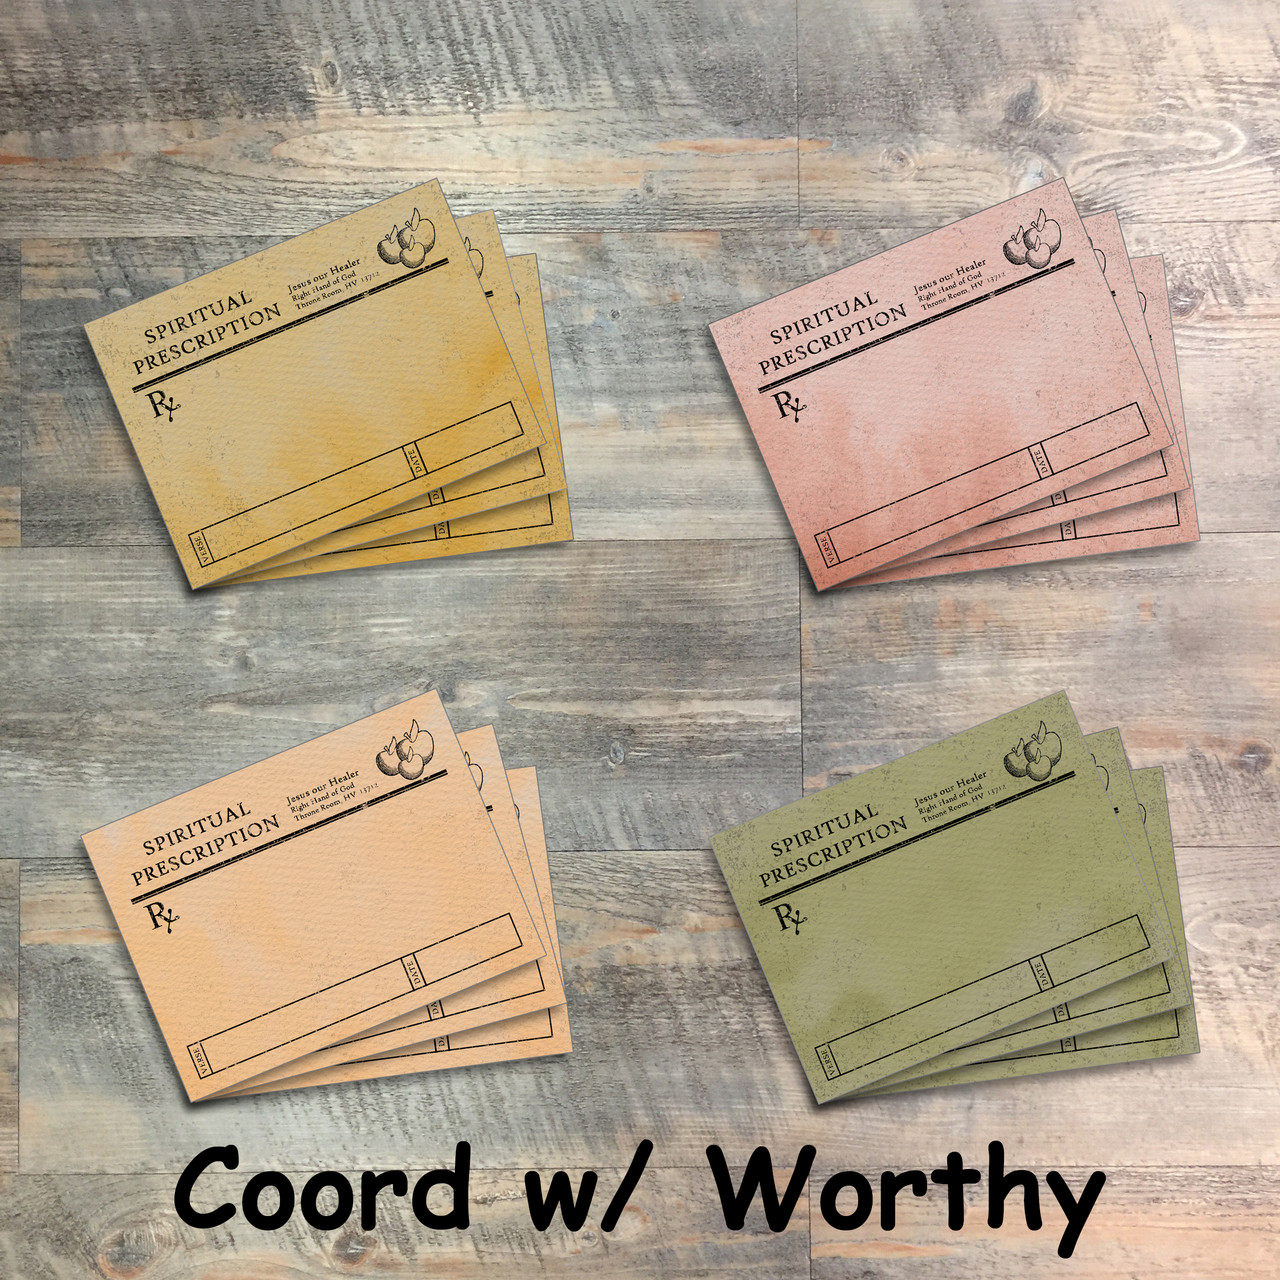 Journaling Cards - Spiritual Prescription Cards - Coordinates with Worthy of the Gospel - 12 3x4 Journaling Cards